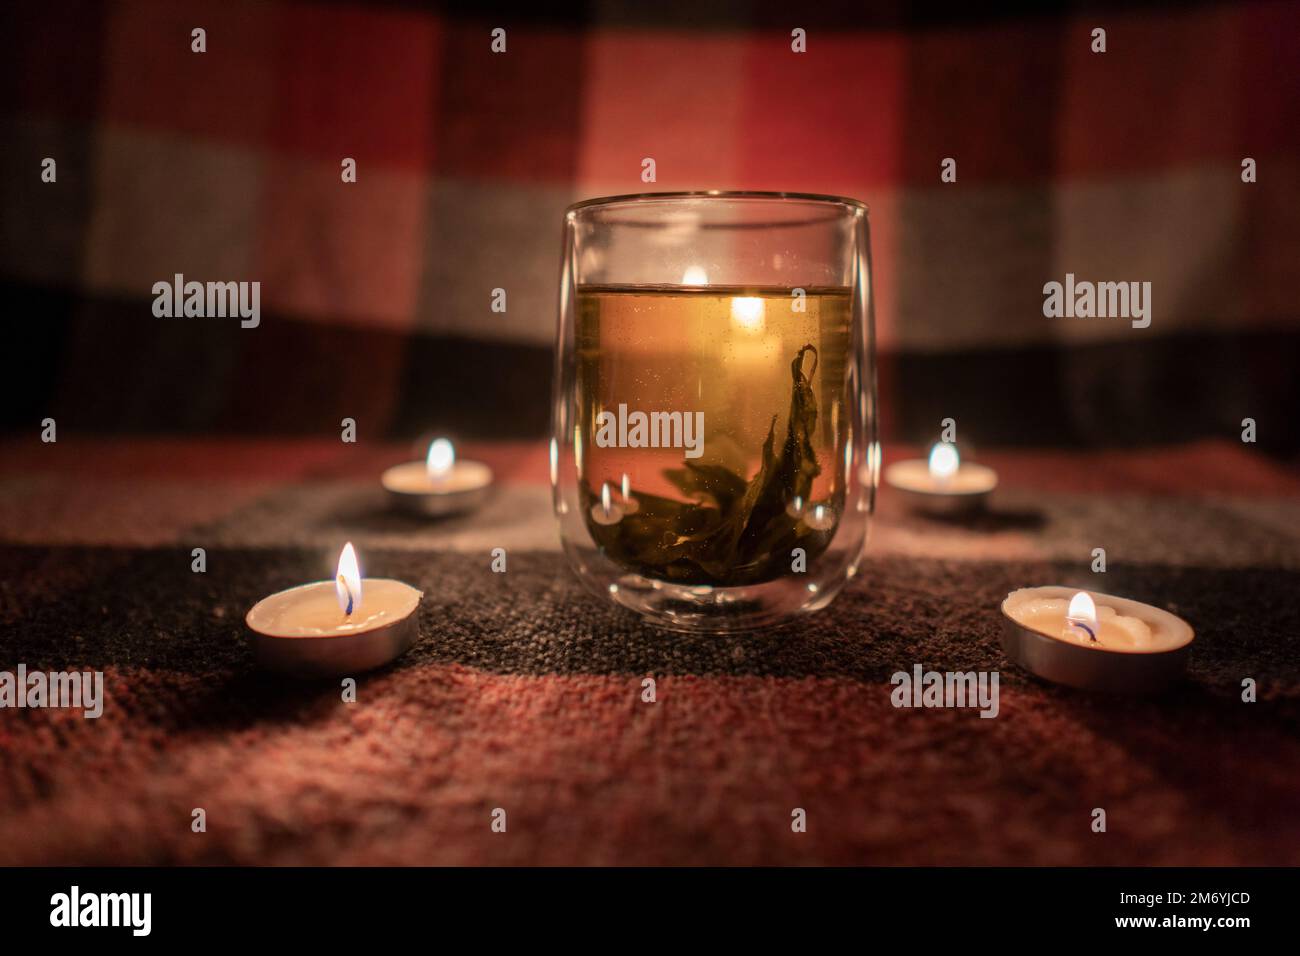 https://c8.alamy.com/comp/2M6YJCD/blackout-energy-crisis-destruction-of-infrastructure-power-outage-concept-a-transparent-cup-of-herbal-tea-stands-in-a-circle-of-burning-candles-2M6YJCD.jpg